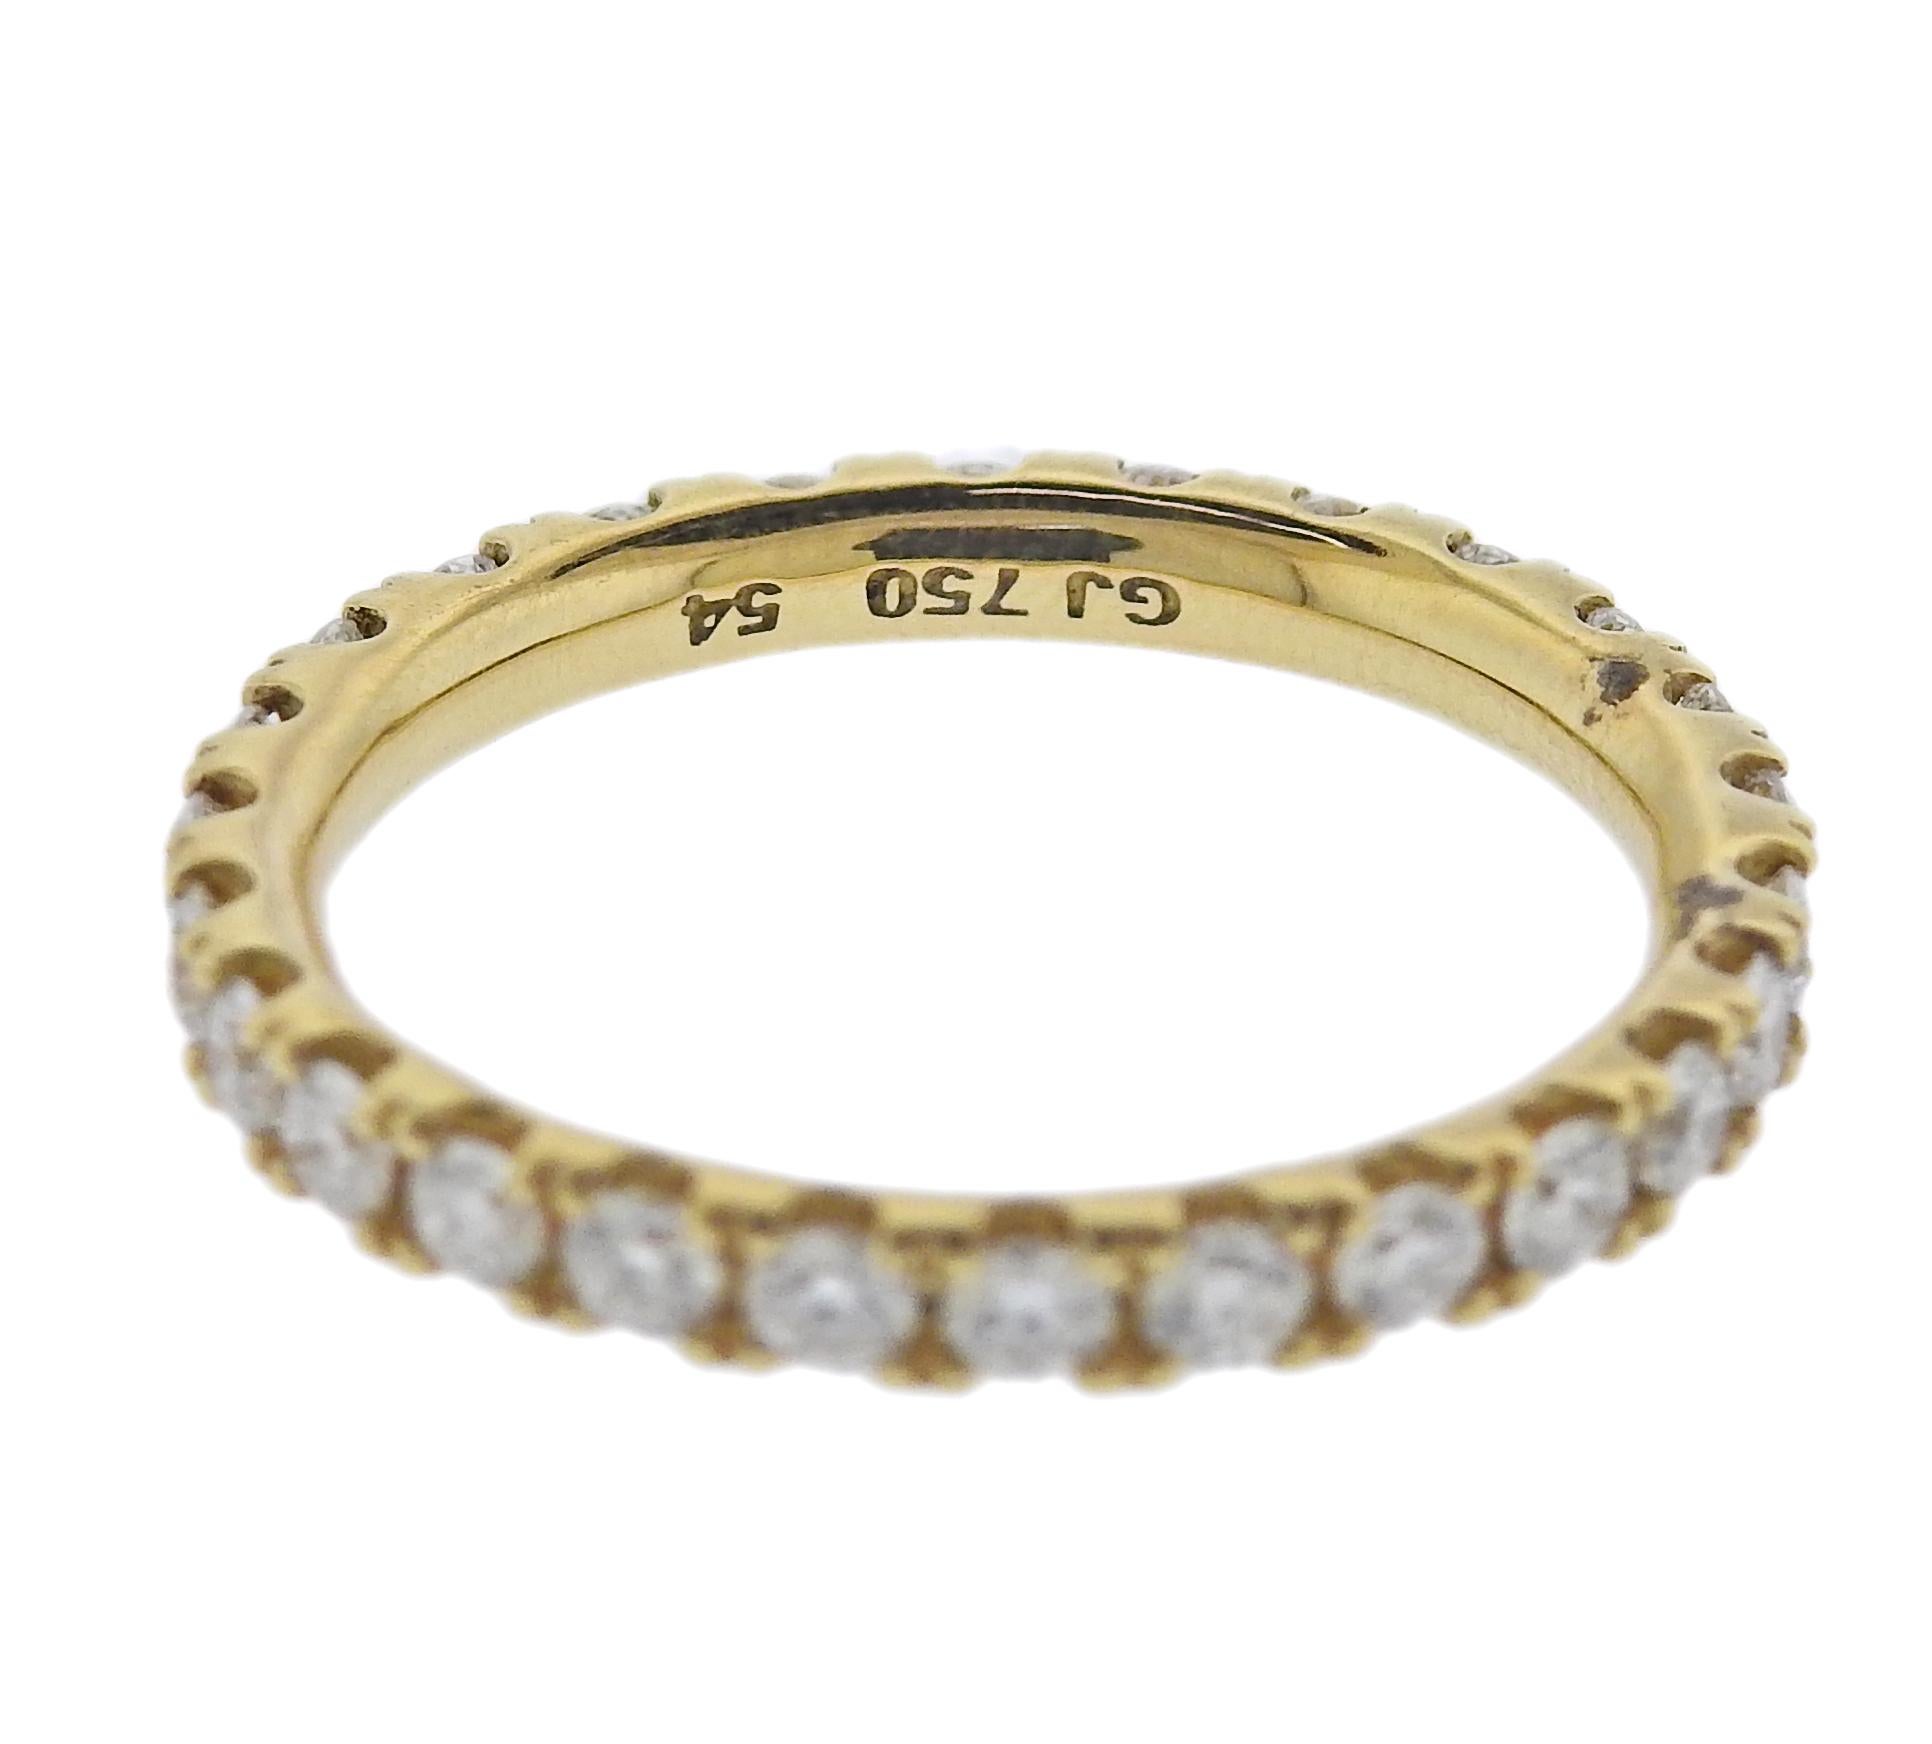 Brand new 18k yellow gold Aurora wedding band ring by Georg Jensen, with approx. 0.91ctw G/VS diamonds. Model # 35727800. Ring is 2mm wide, Available in sizes: 51,55. Marked: GJ, 750, ring size. Weight - 3 grams.